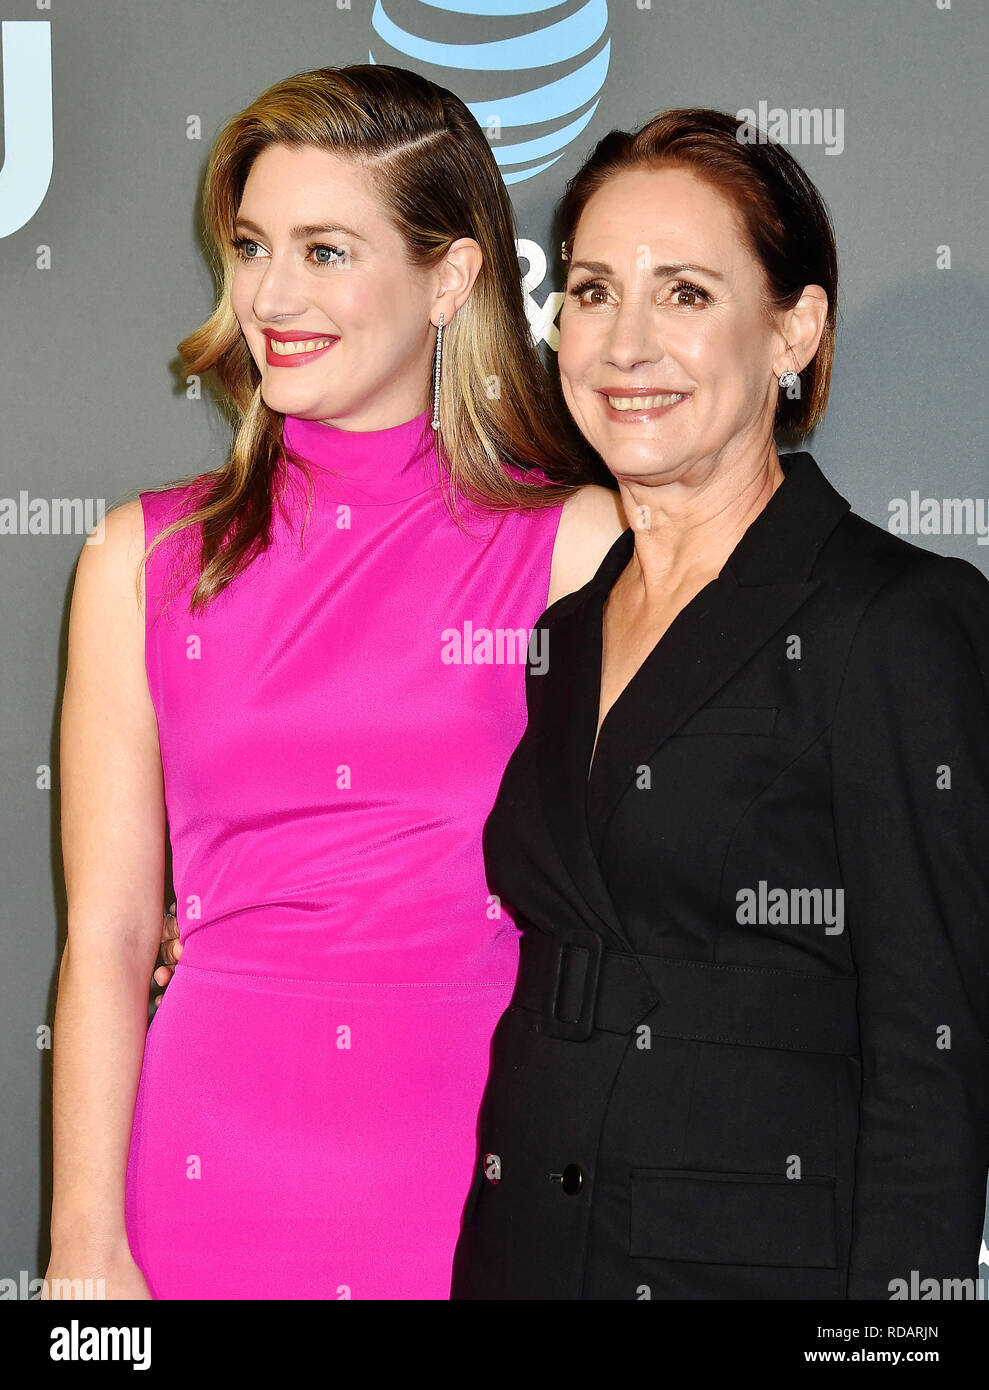 SANTA MONICA, CA - JANUARY 13: Zoe Perry (L) and Laurie Metcalf arrive at the The 24th Annual Critics' Choice Awards attends The 24th Annual Critics'  Stock Photo